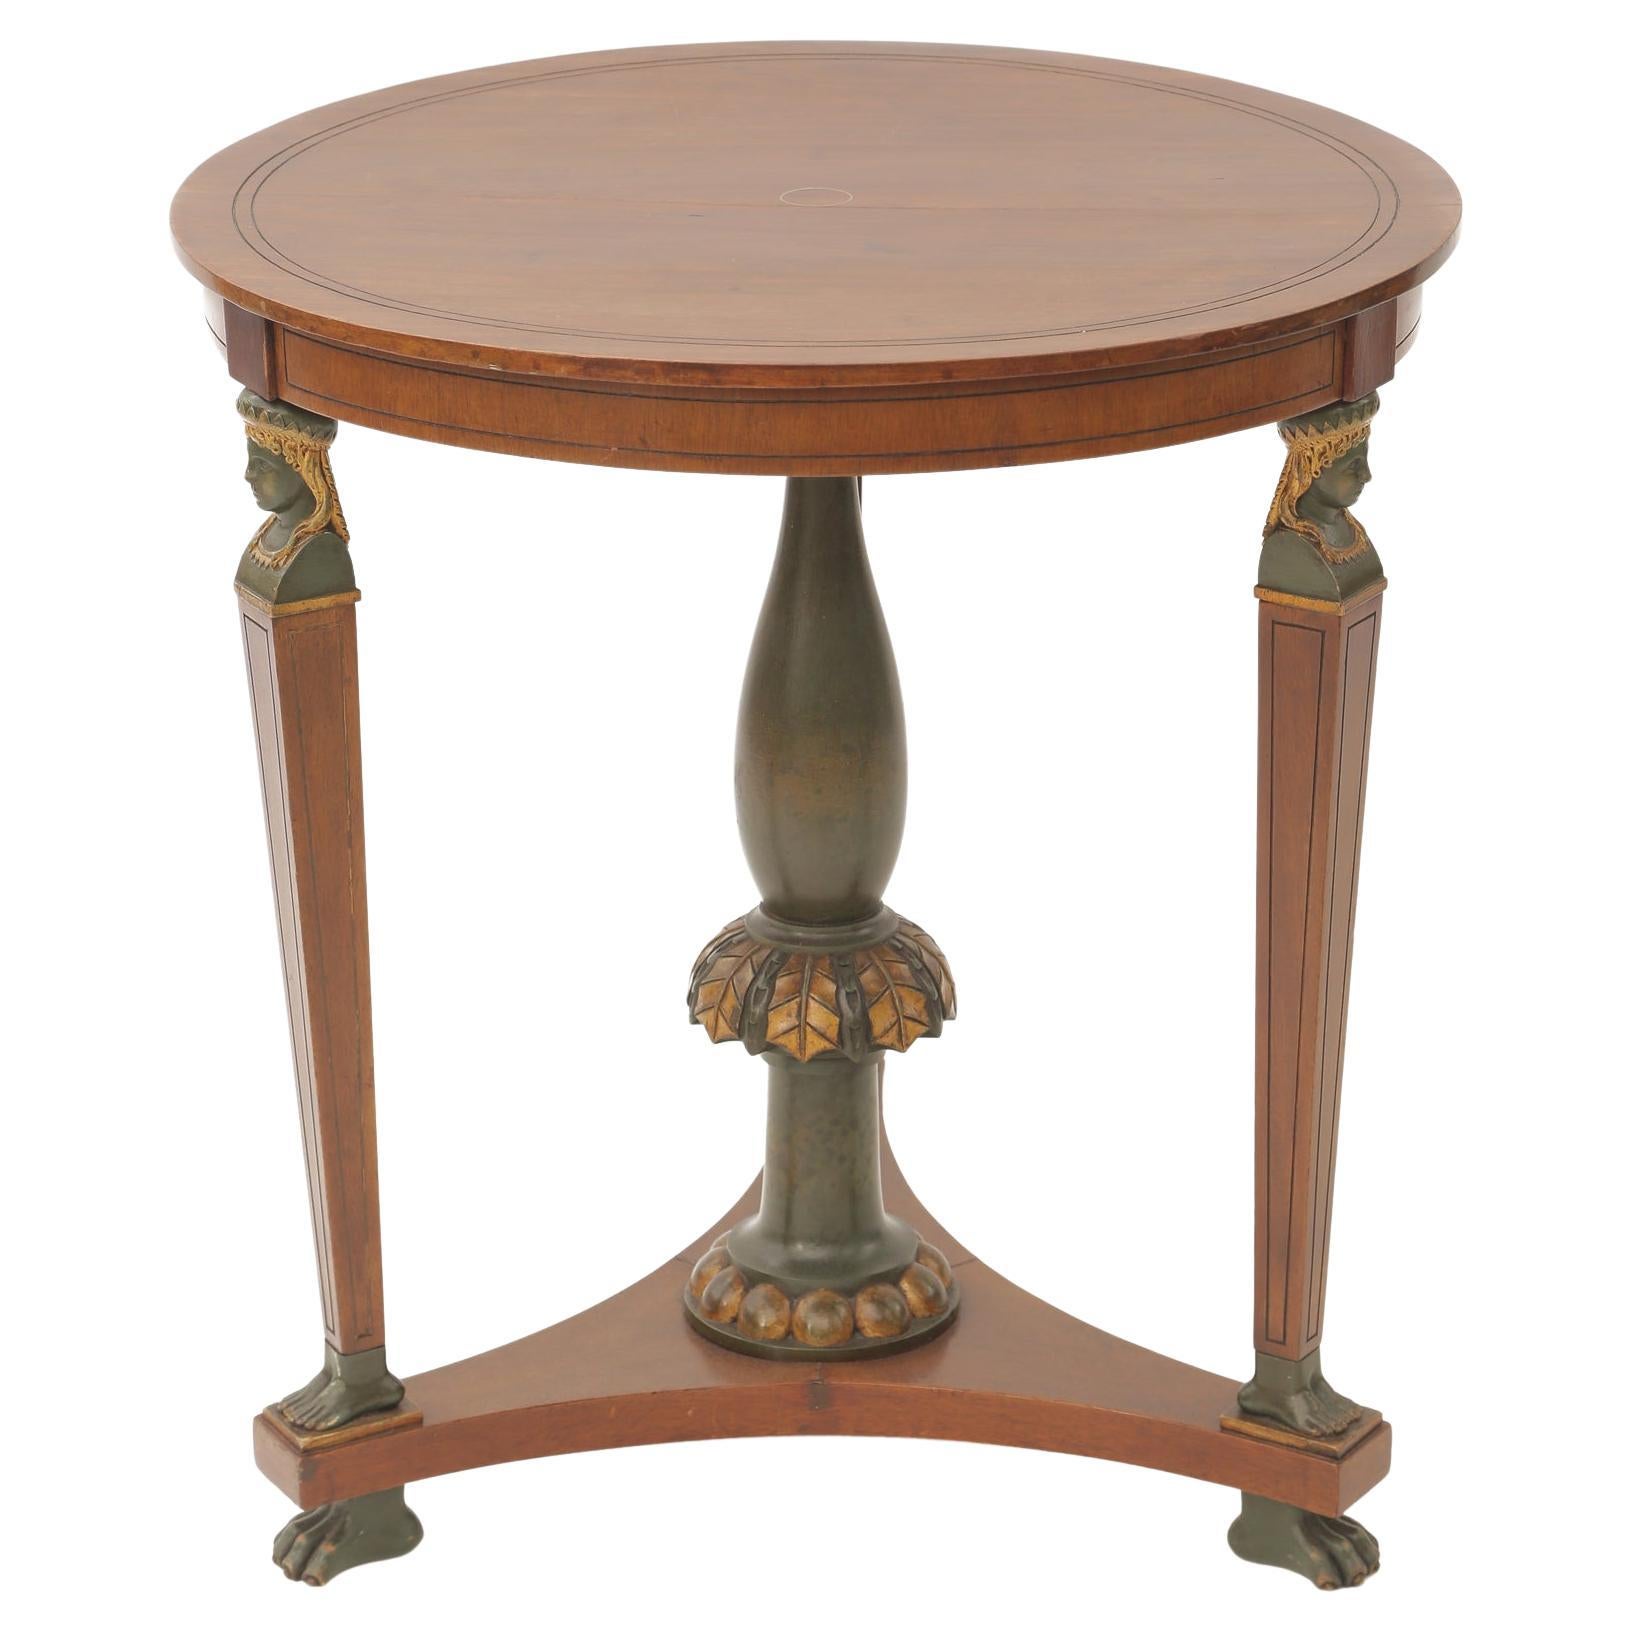 Egyptian Revival Rosewood Table with Articulated Feet